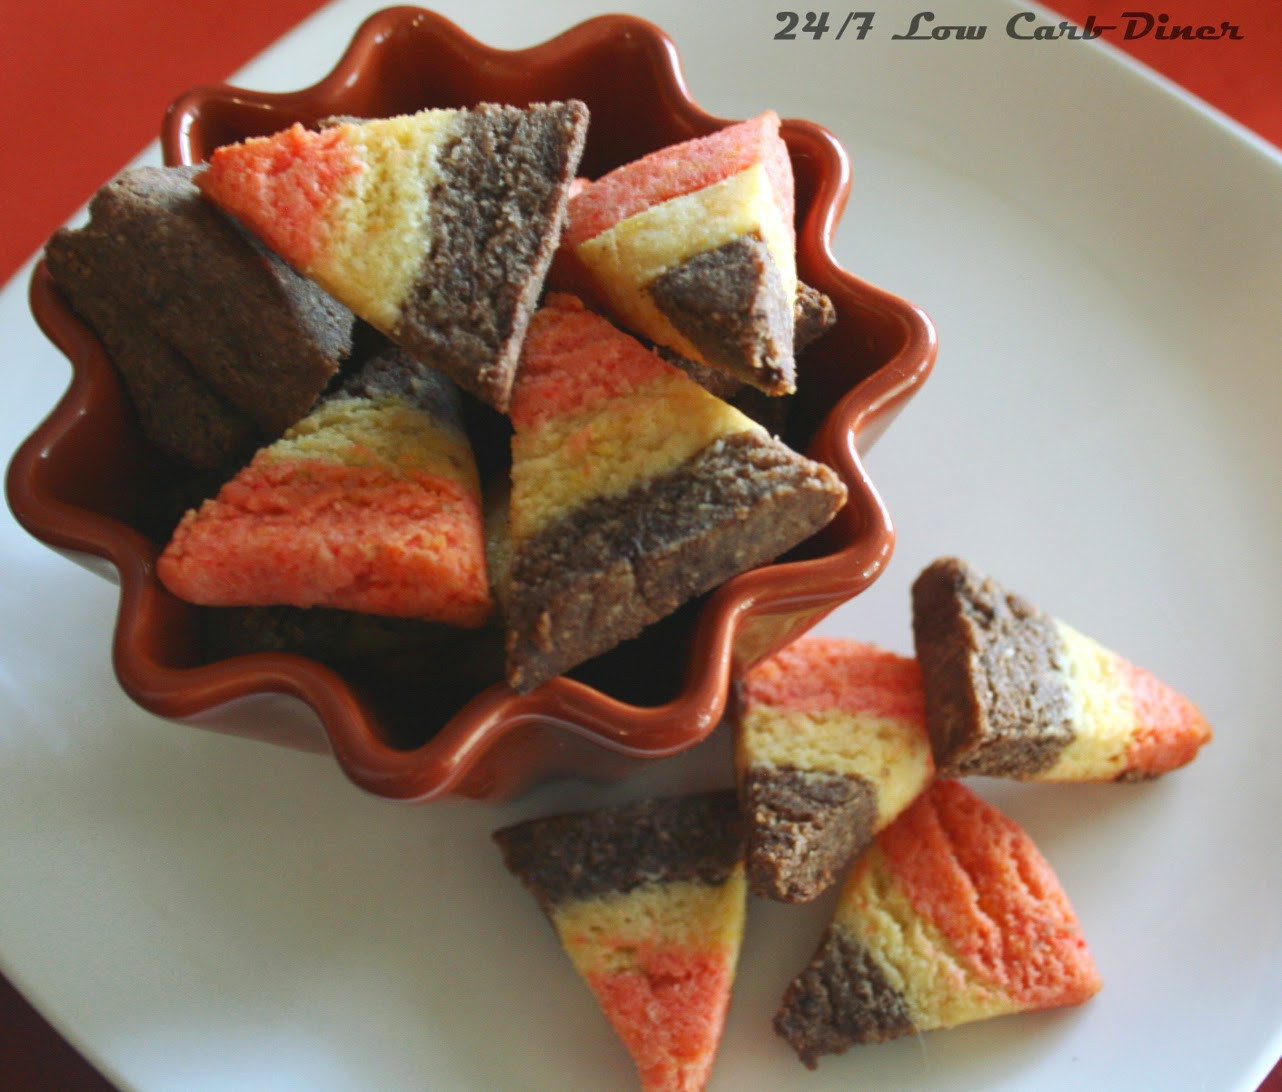 Sugar Free Candy Corn
 24 7 Low Carb Diner Candy Corn Cookies or Autumn Leaf Cookies